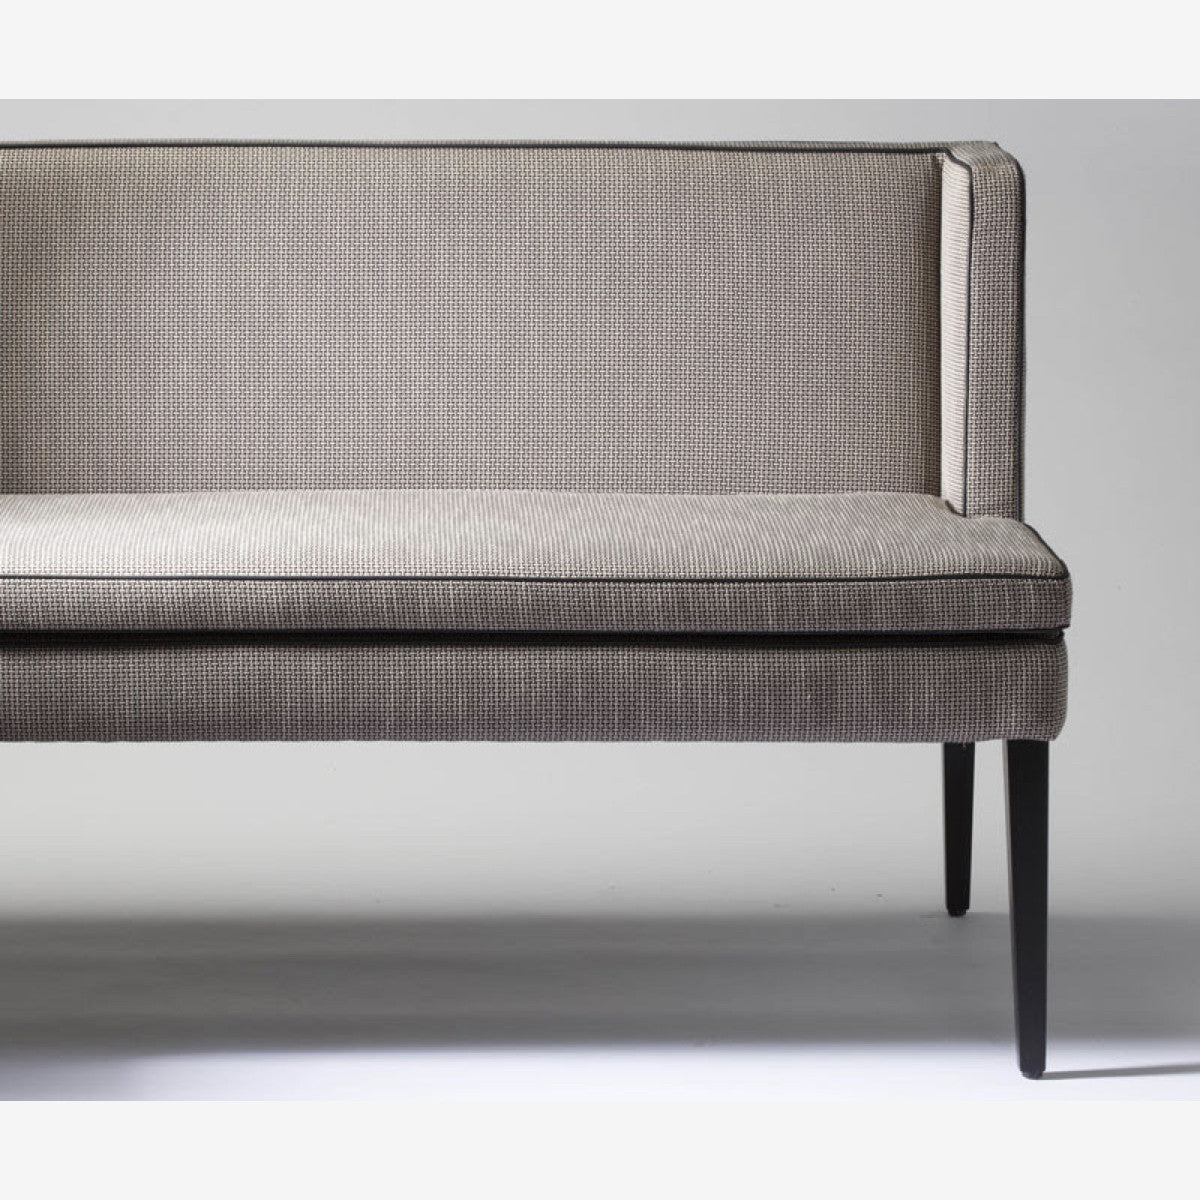 Luxury Bench with fabric cover